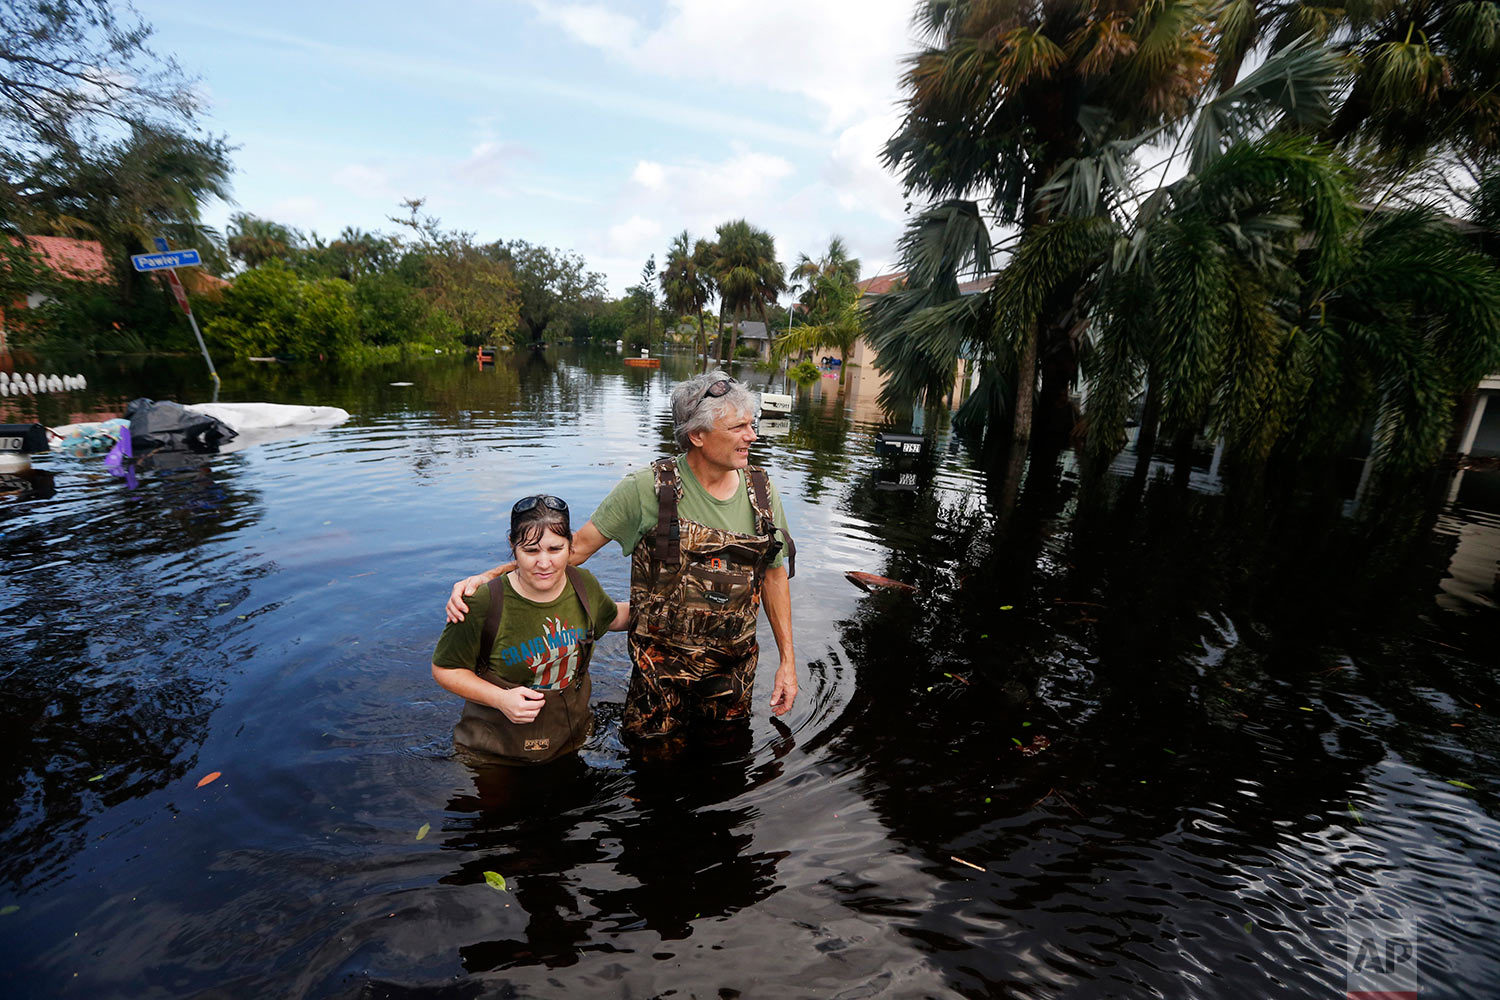  Kelly McClenthen returns to see the flood damage to her home with her boyfriend Daniel Harrison in the aftermath of Hurricane Irma in Bonita Springs, Fla., Monday, Sept. 11, 2017. (AP Photo/Gerald Herbert) 